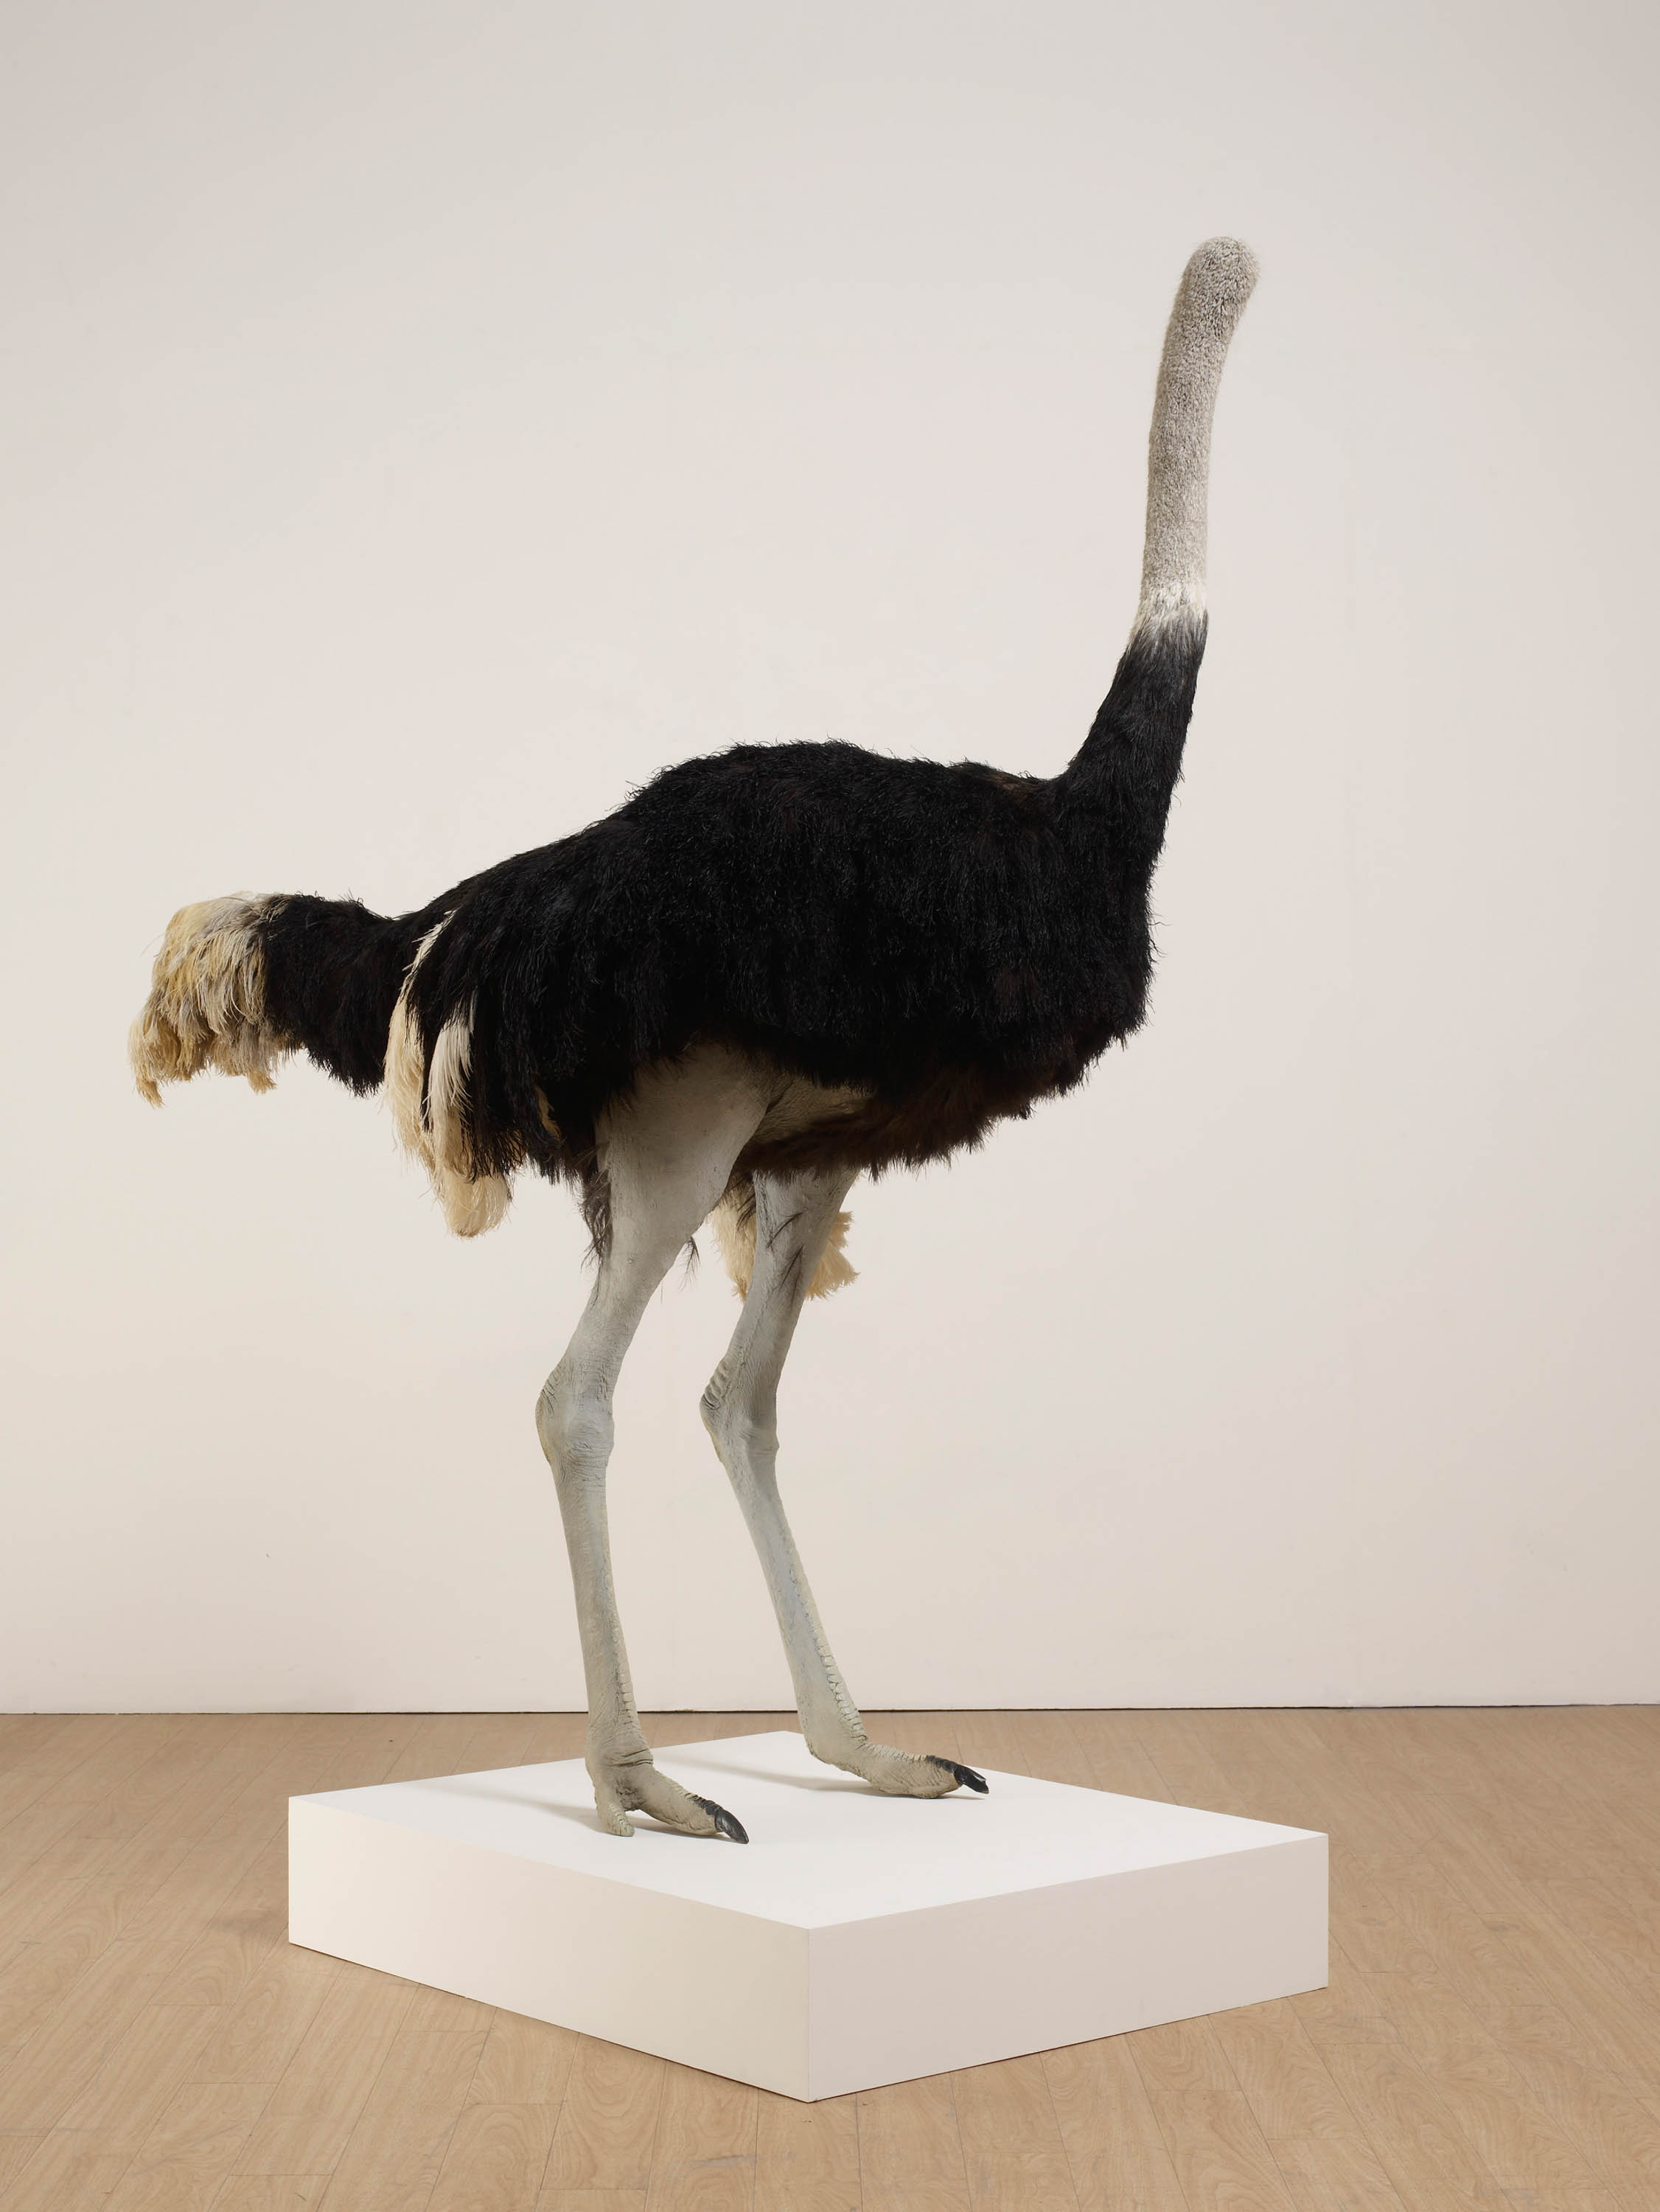 David Shrigley, Ostrich, 2009 Taxidermy ostrich  195 x 160 x 95cm British Council Collection Courtesy of the artist and the British Council Collection.  Photograph by Stephen White.